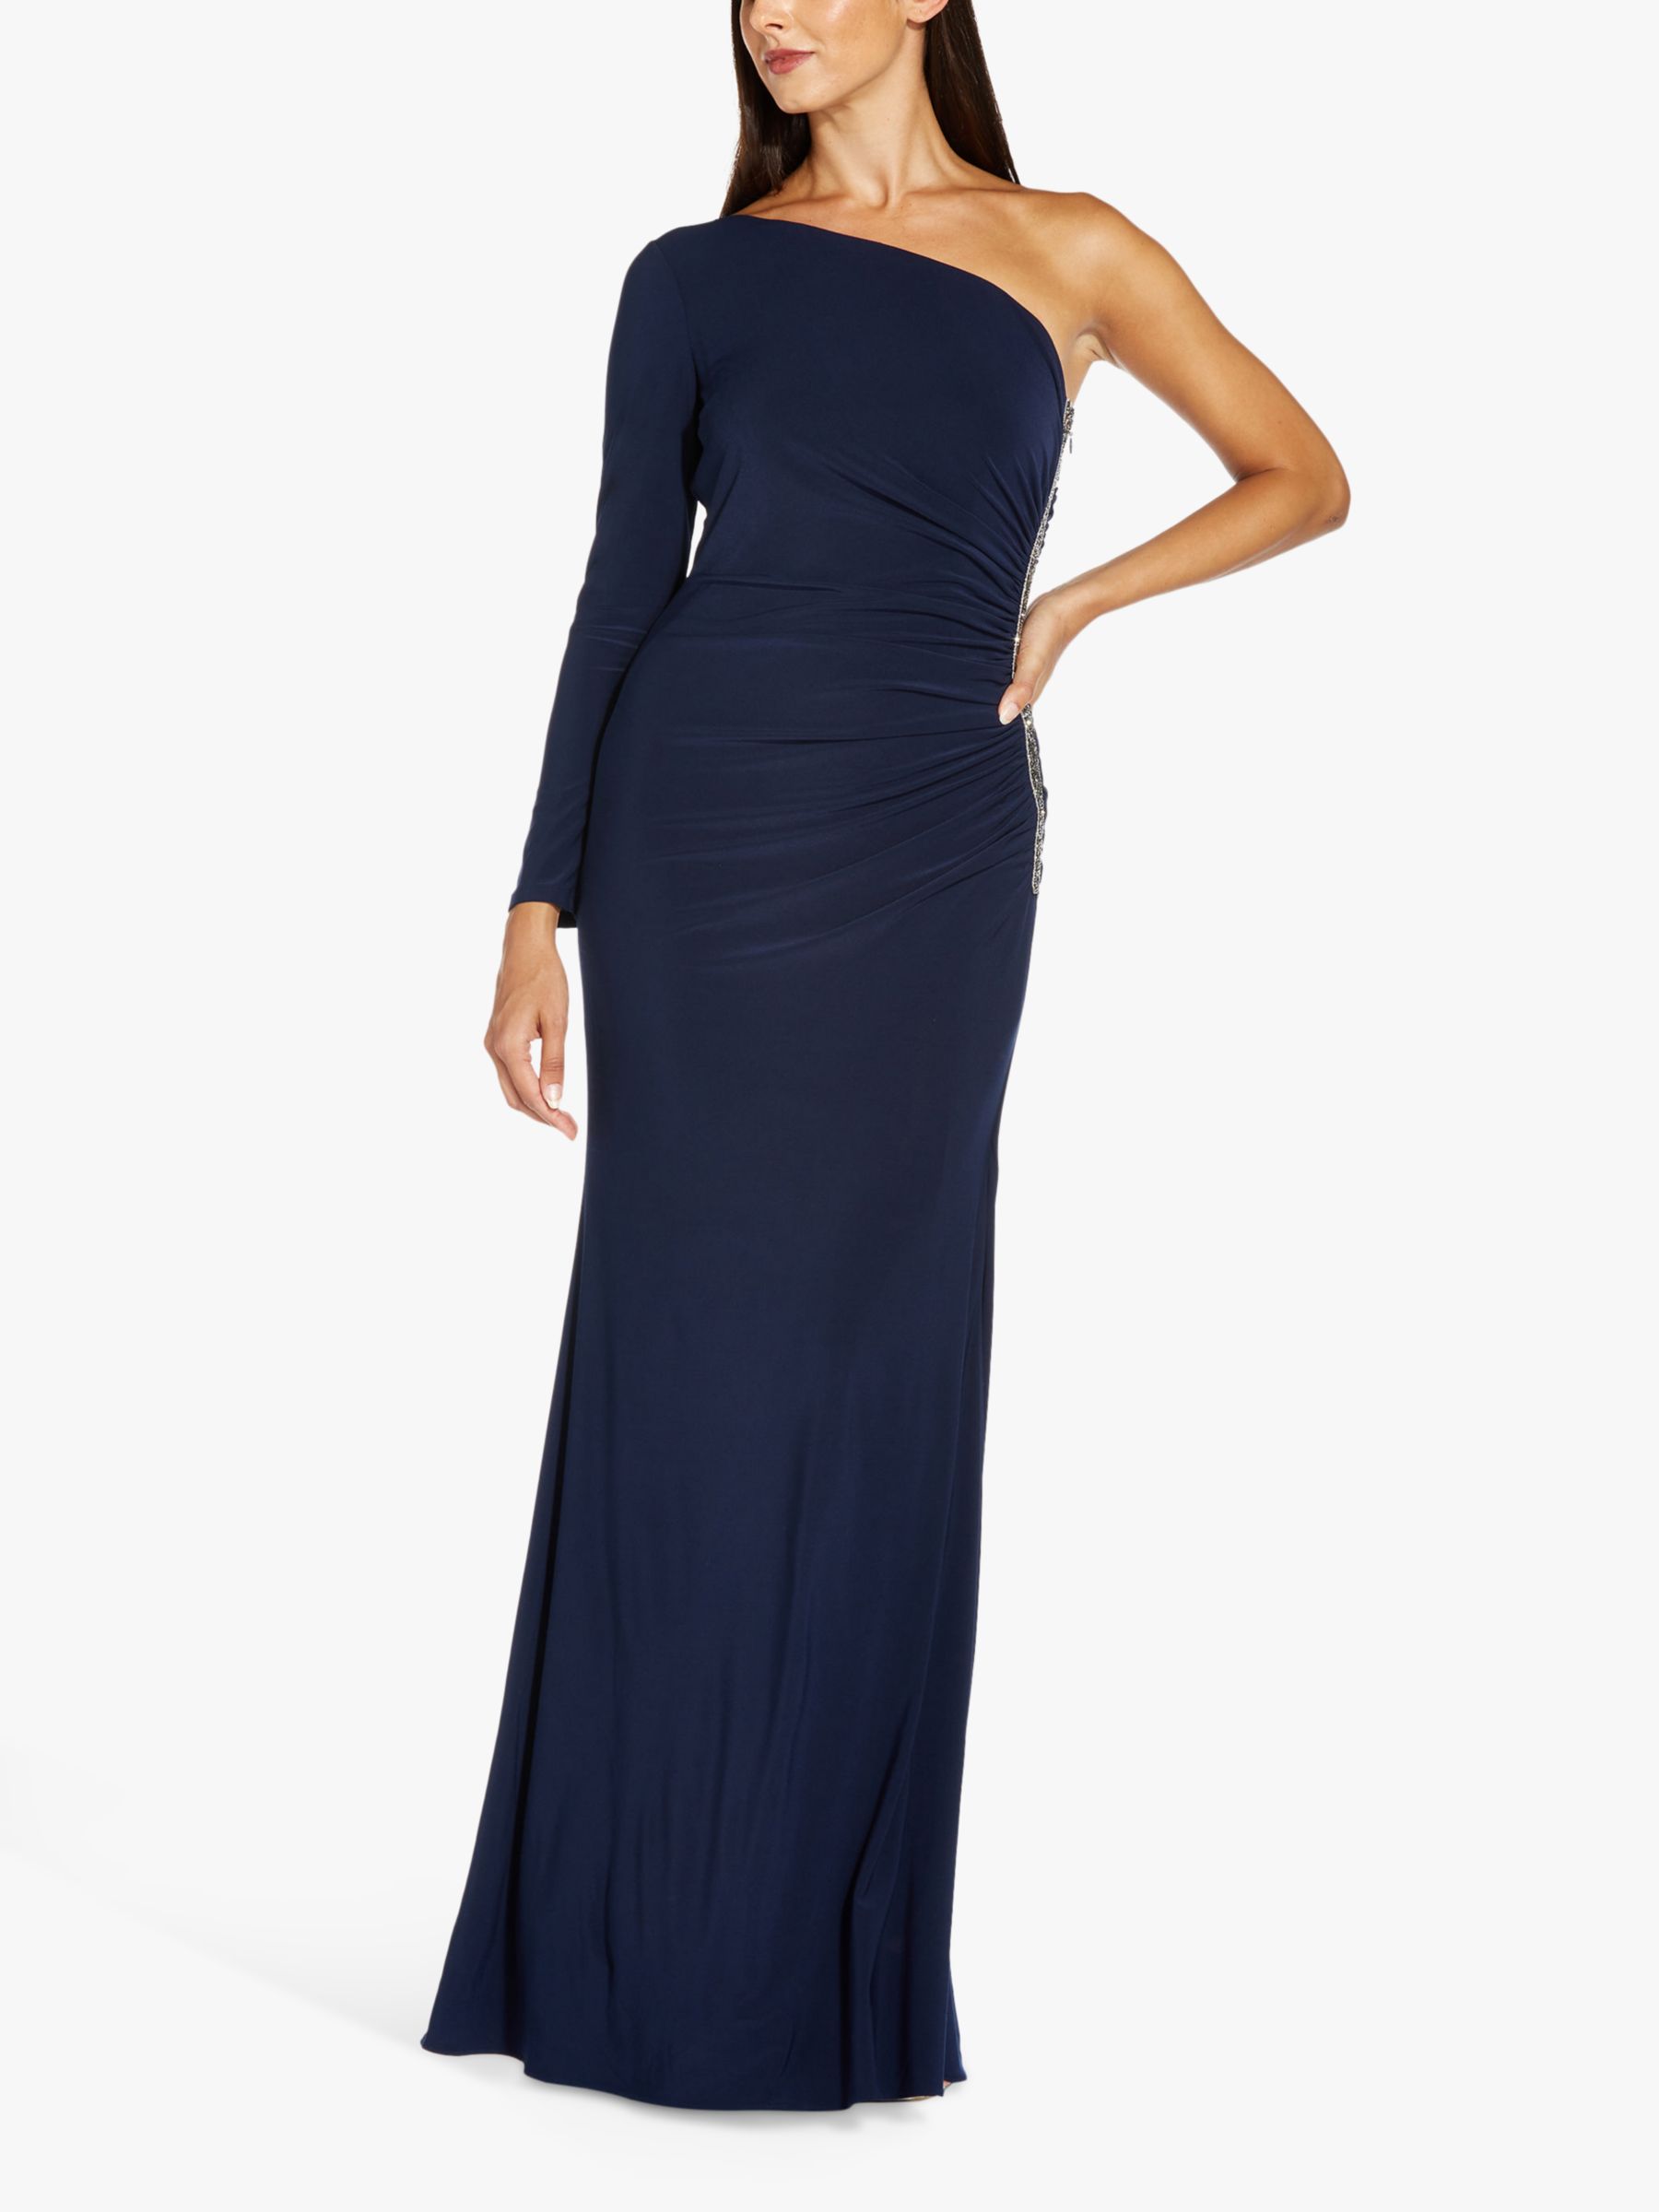 Adrianna Papell One Shoulder Jersey Maxi Dress, Midnight at John Lewis & Partners